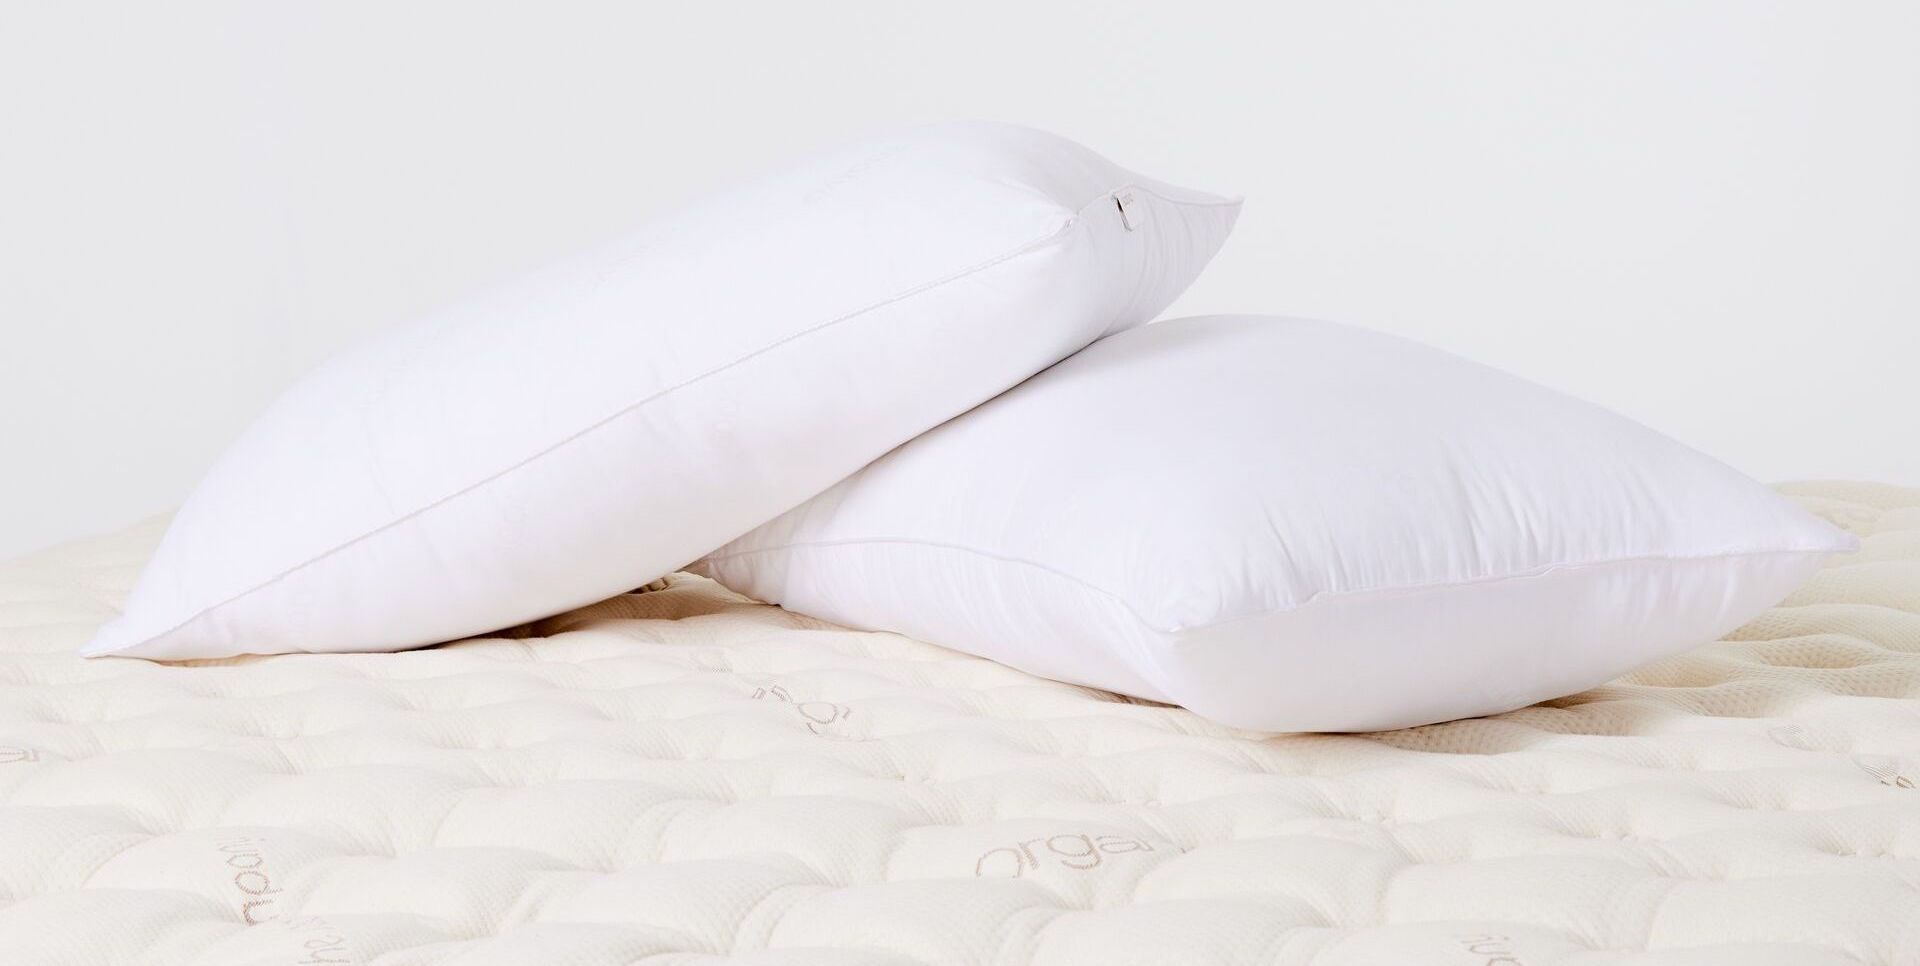 Pillow Stuffing 101: Which Cushions are the Best Quality? – SleepCosee